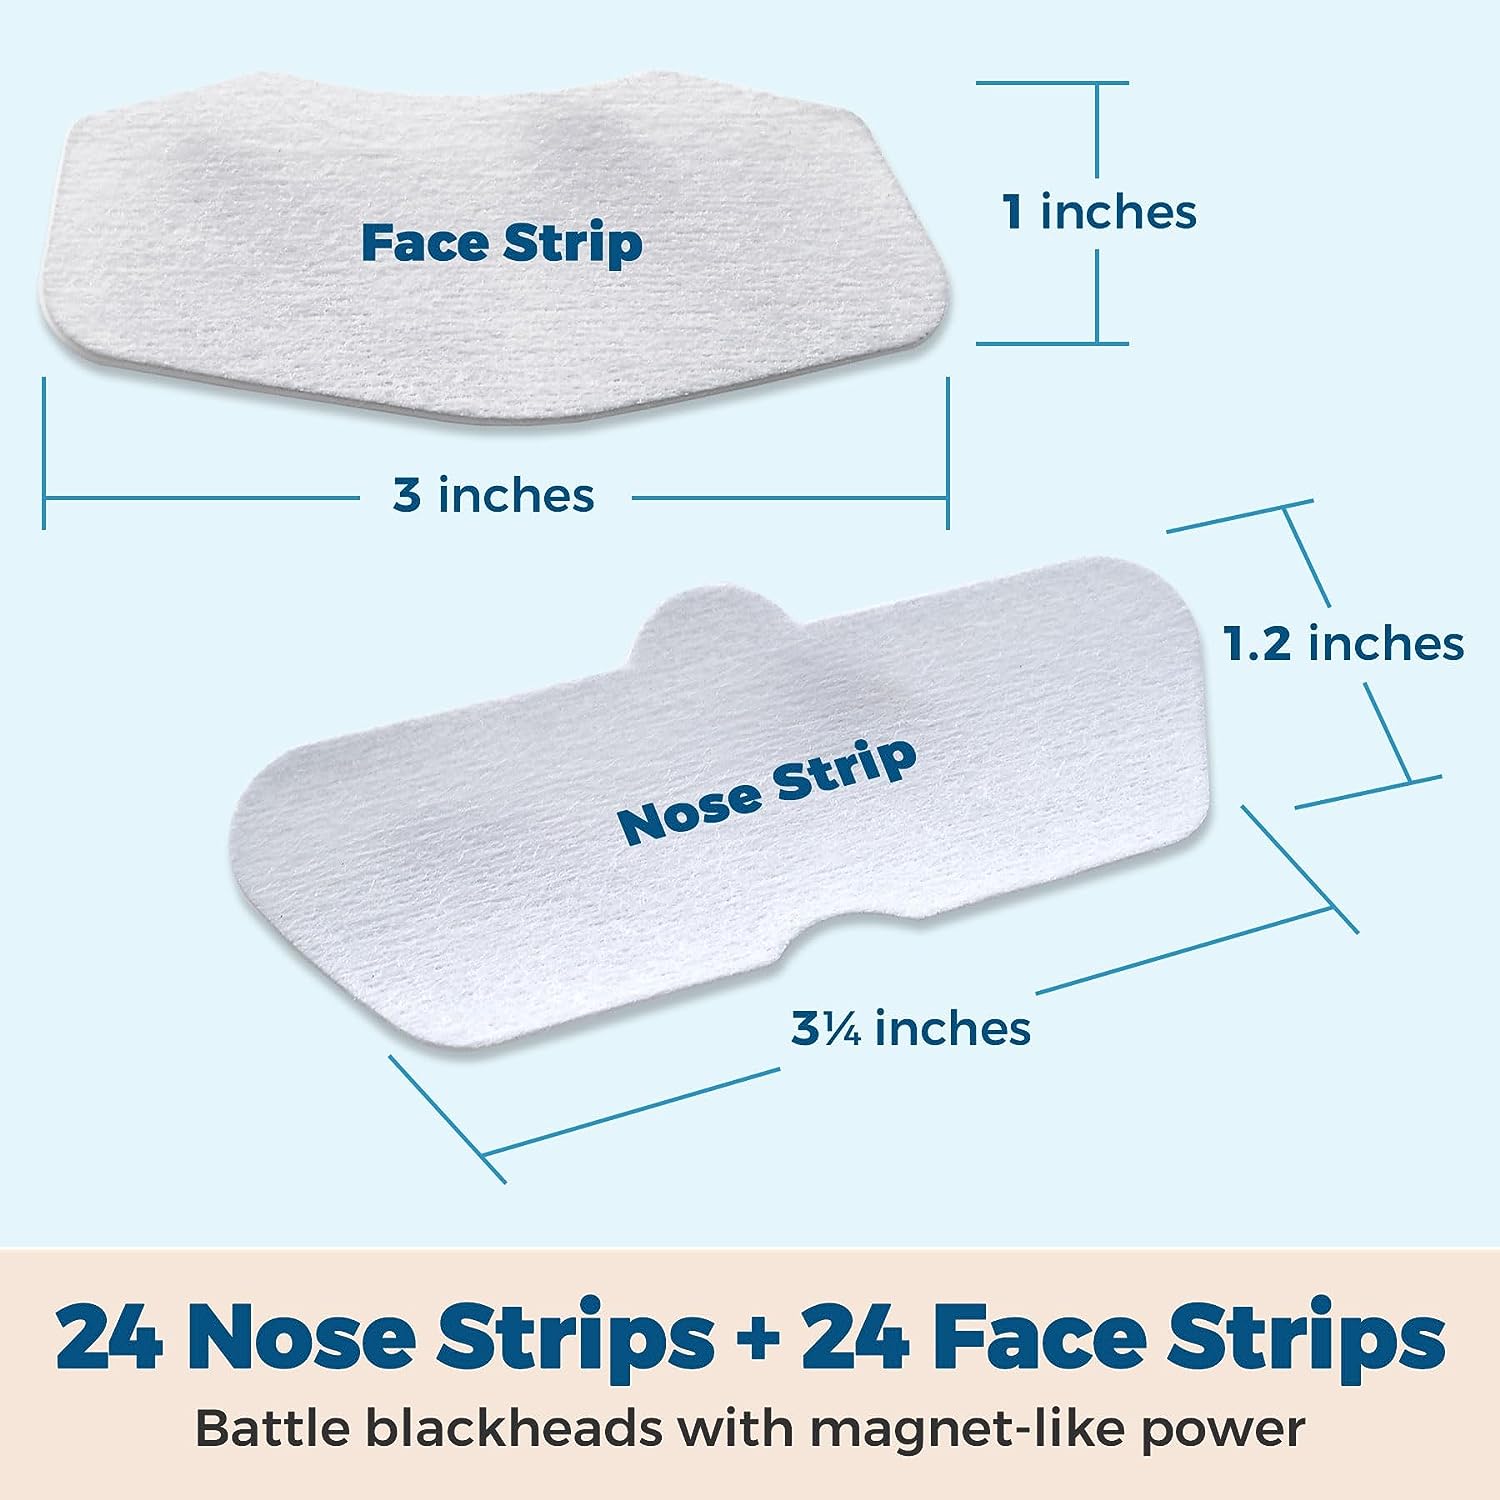 MEDca Deep Cleansing Pore Strips Combo Pack, 48 Count Strips Exfoliants & Scrubs - image 6 of 9